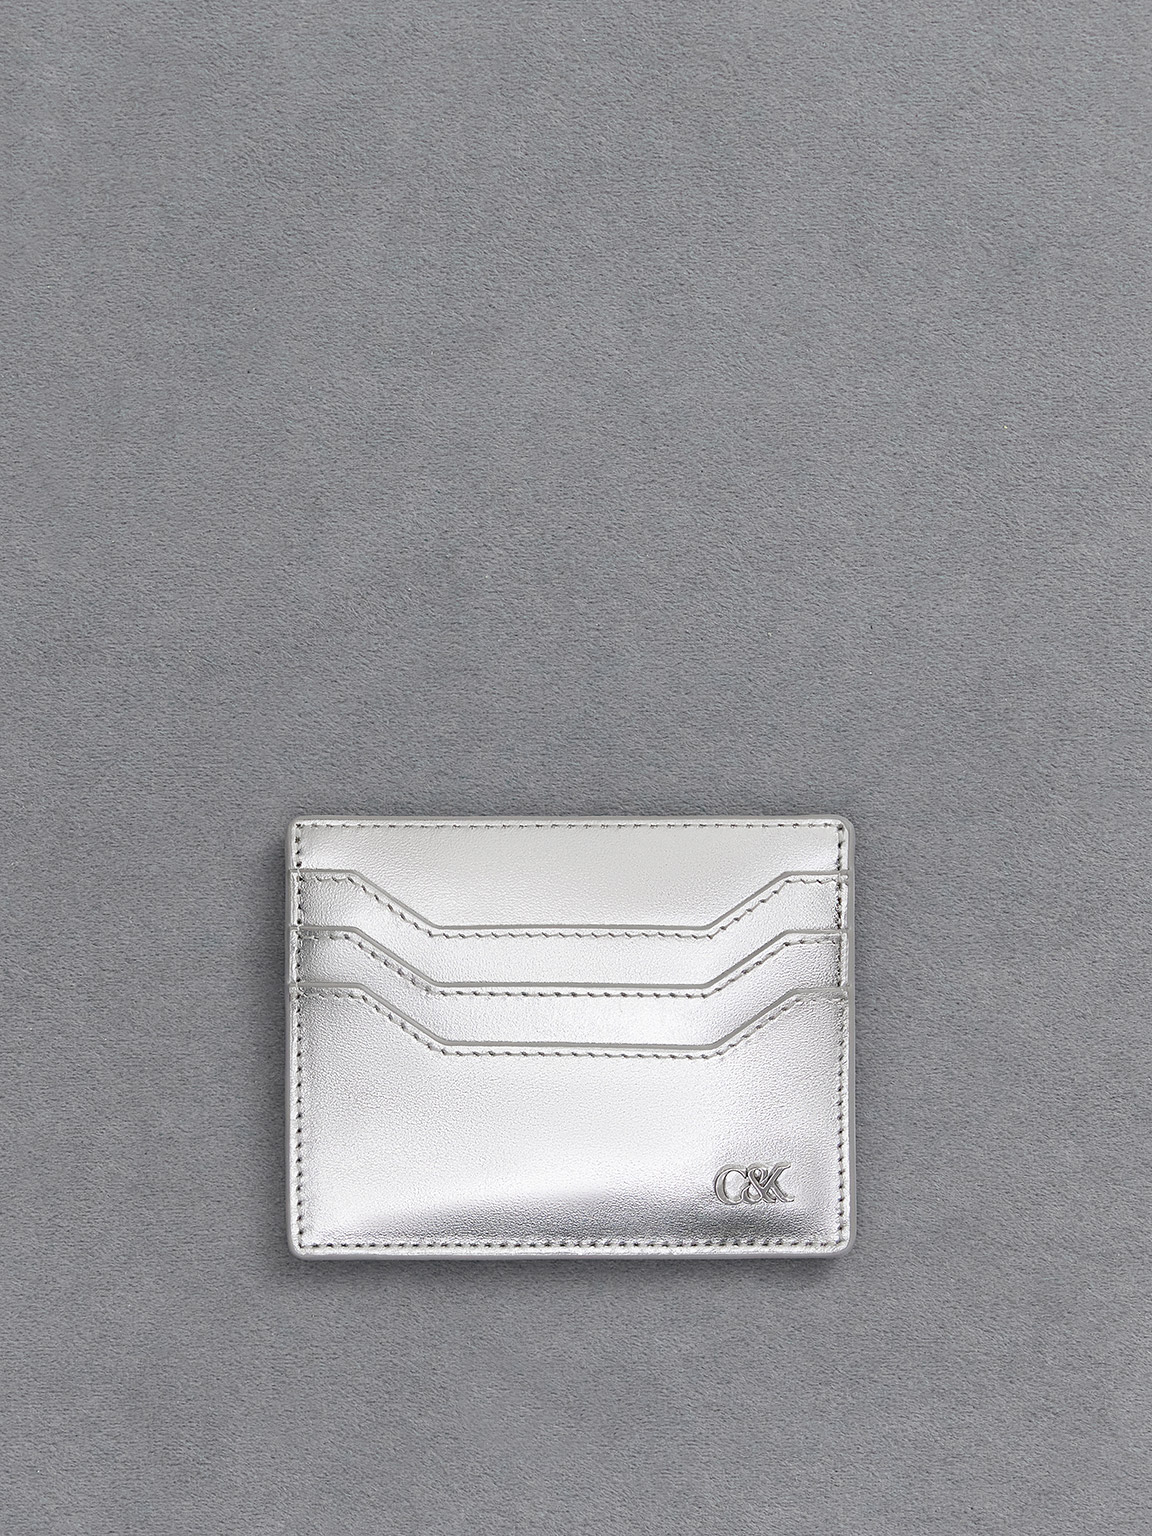 Charles & Keith Metallic Leather Multi-slot Card Holder In Silver